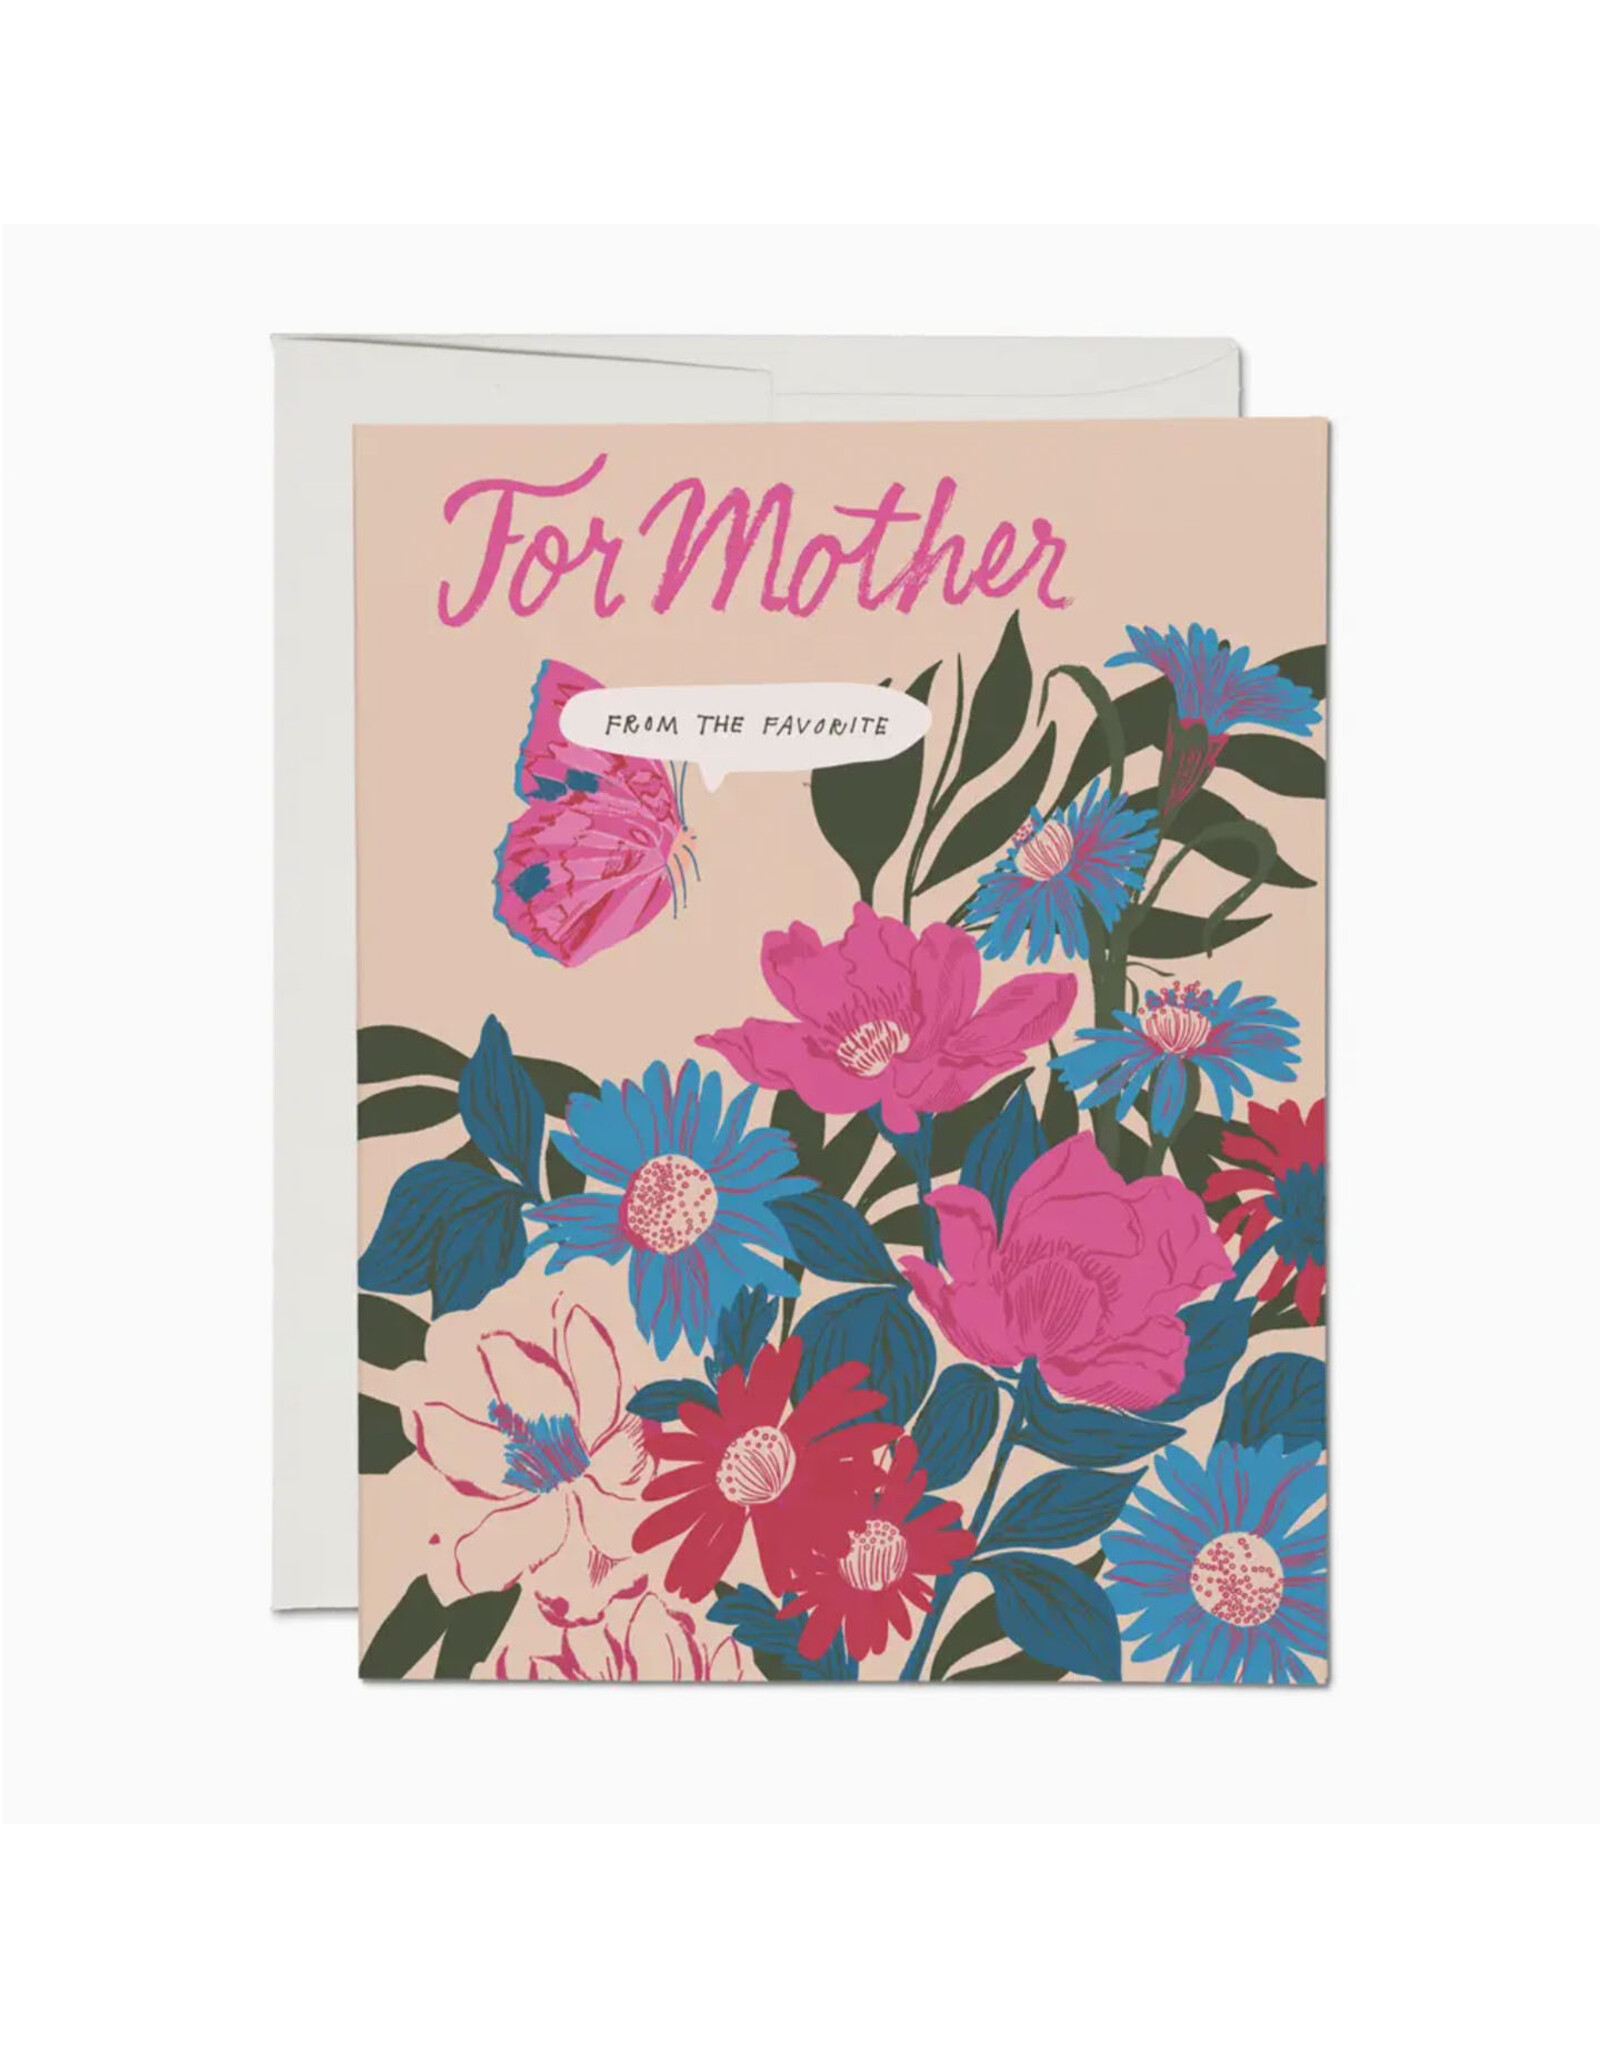 For Mother (From The Favorite) Greeting Card